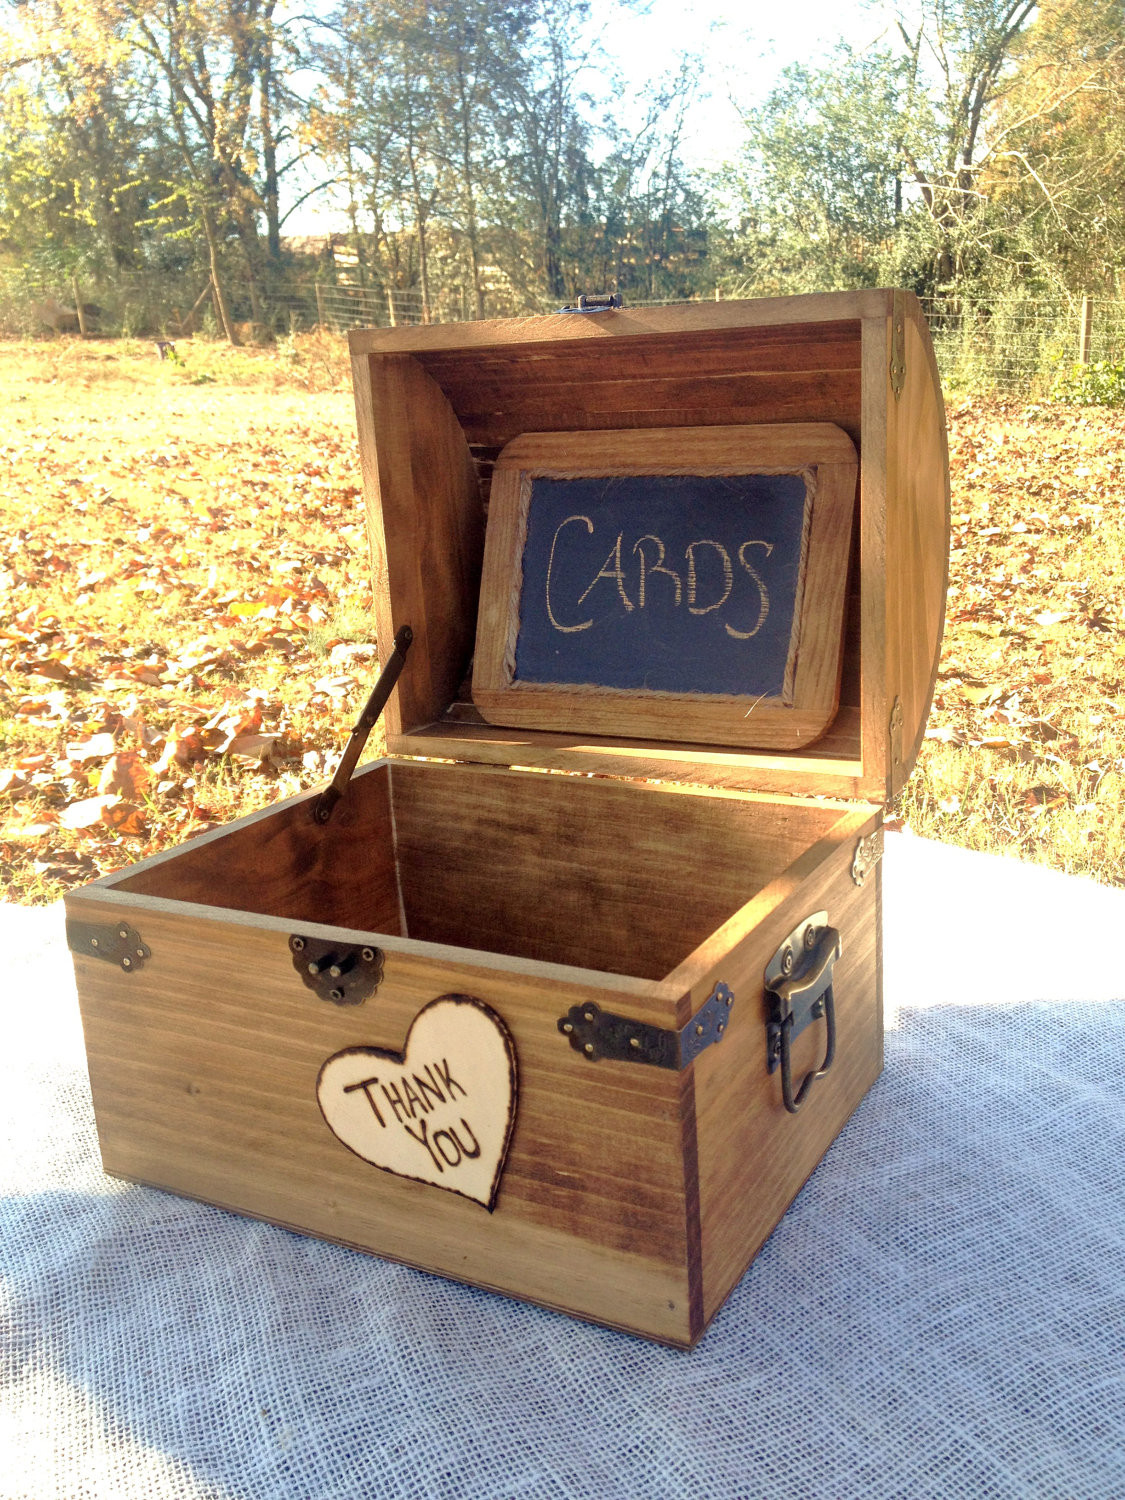 DIY Wooden Wedding Card Box
 Shabby Chic and Rustic Wooden Card Box by